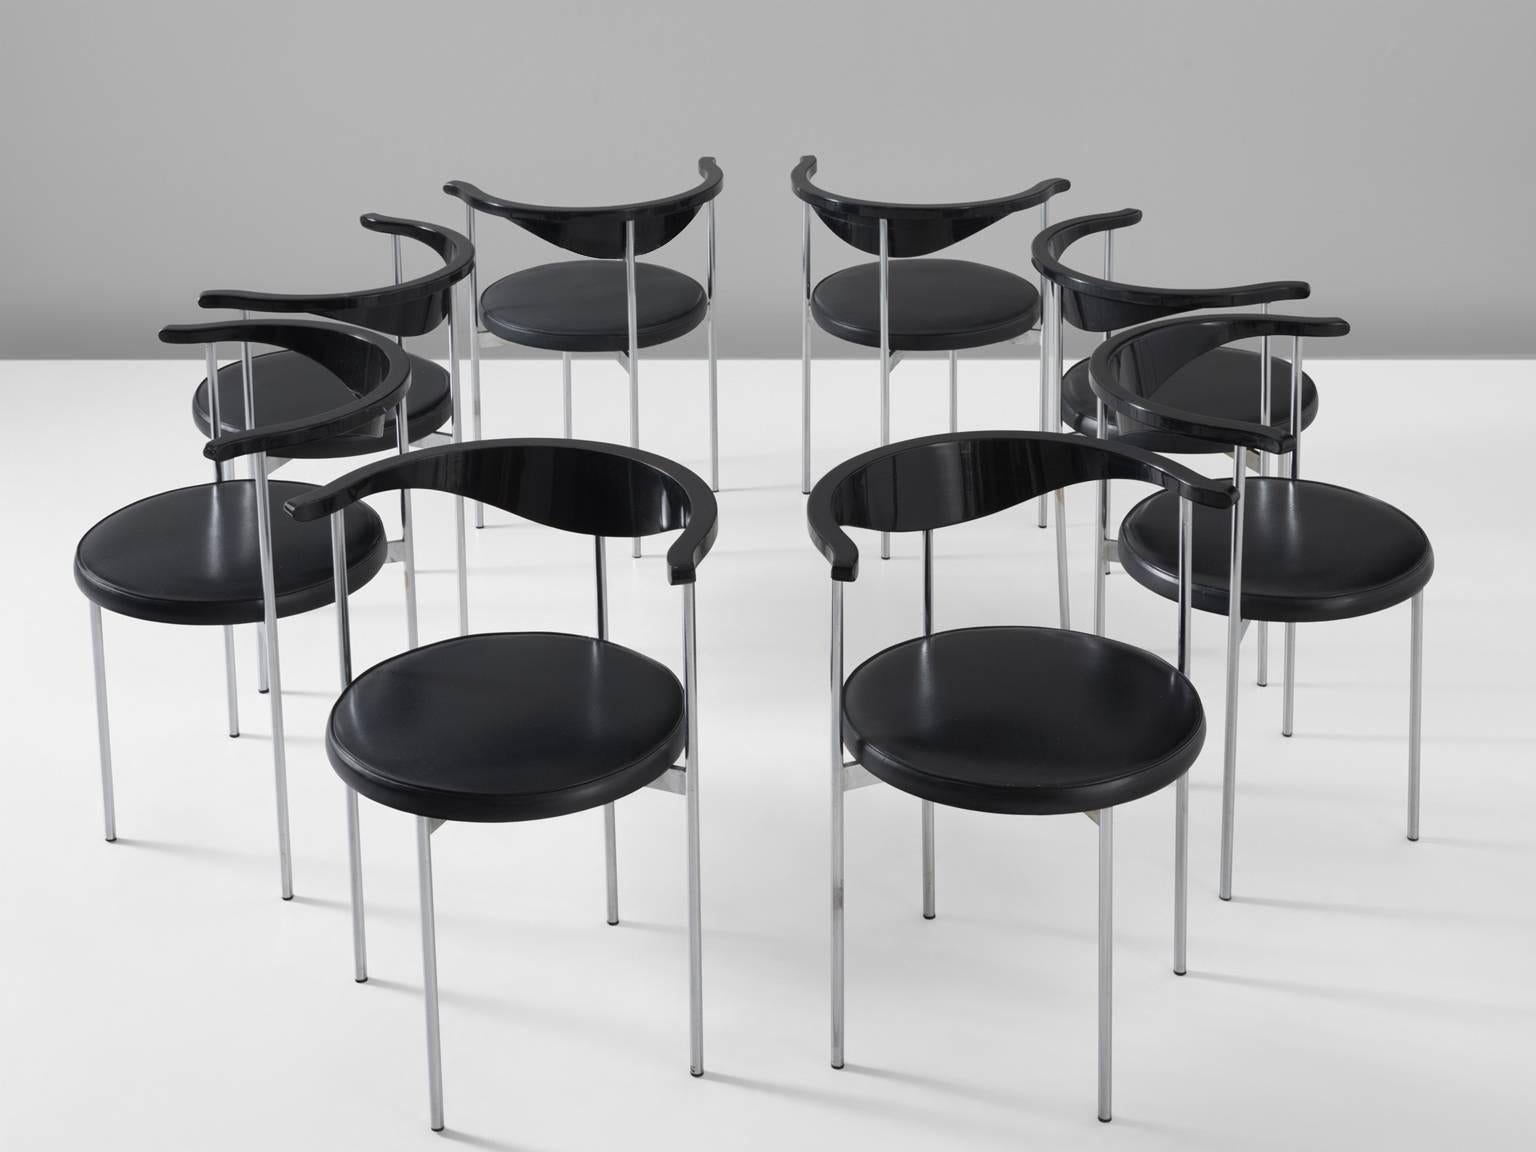 Set of eight Frederik Sieck chairs, skai and metal, Denmark, 1960s.

These Industrial clear set of the model 3200 chairs were designed by the Swedish Frederik Sieck for Fritz Hansen. The round chair has a Classic outward curving toprail. The chair